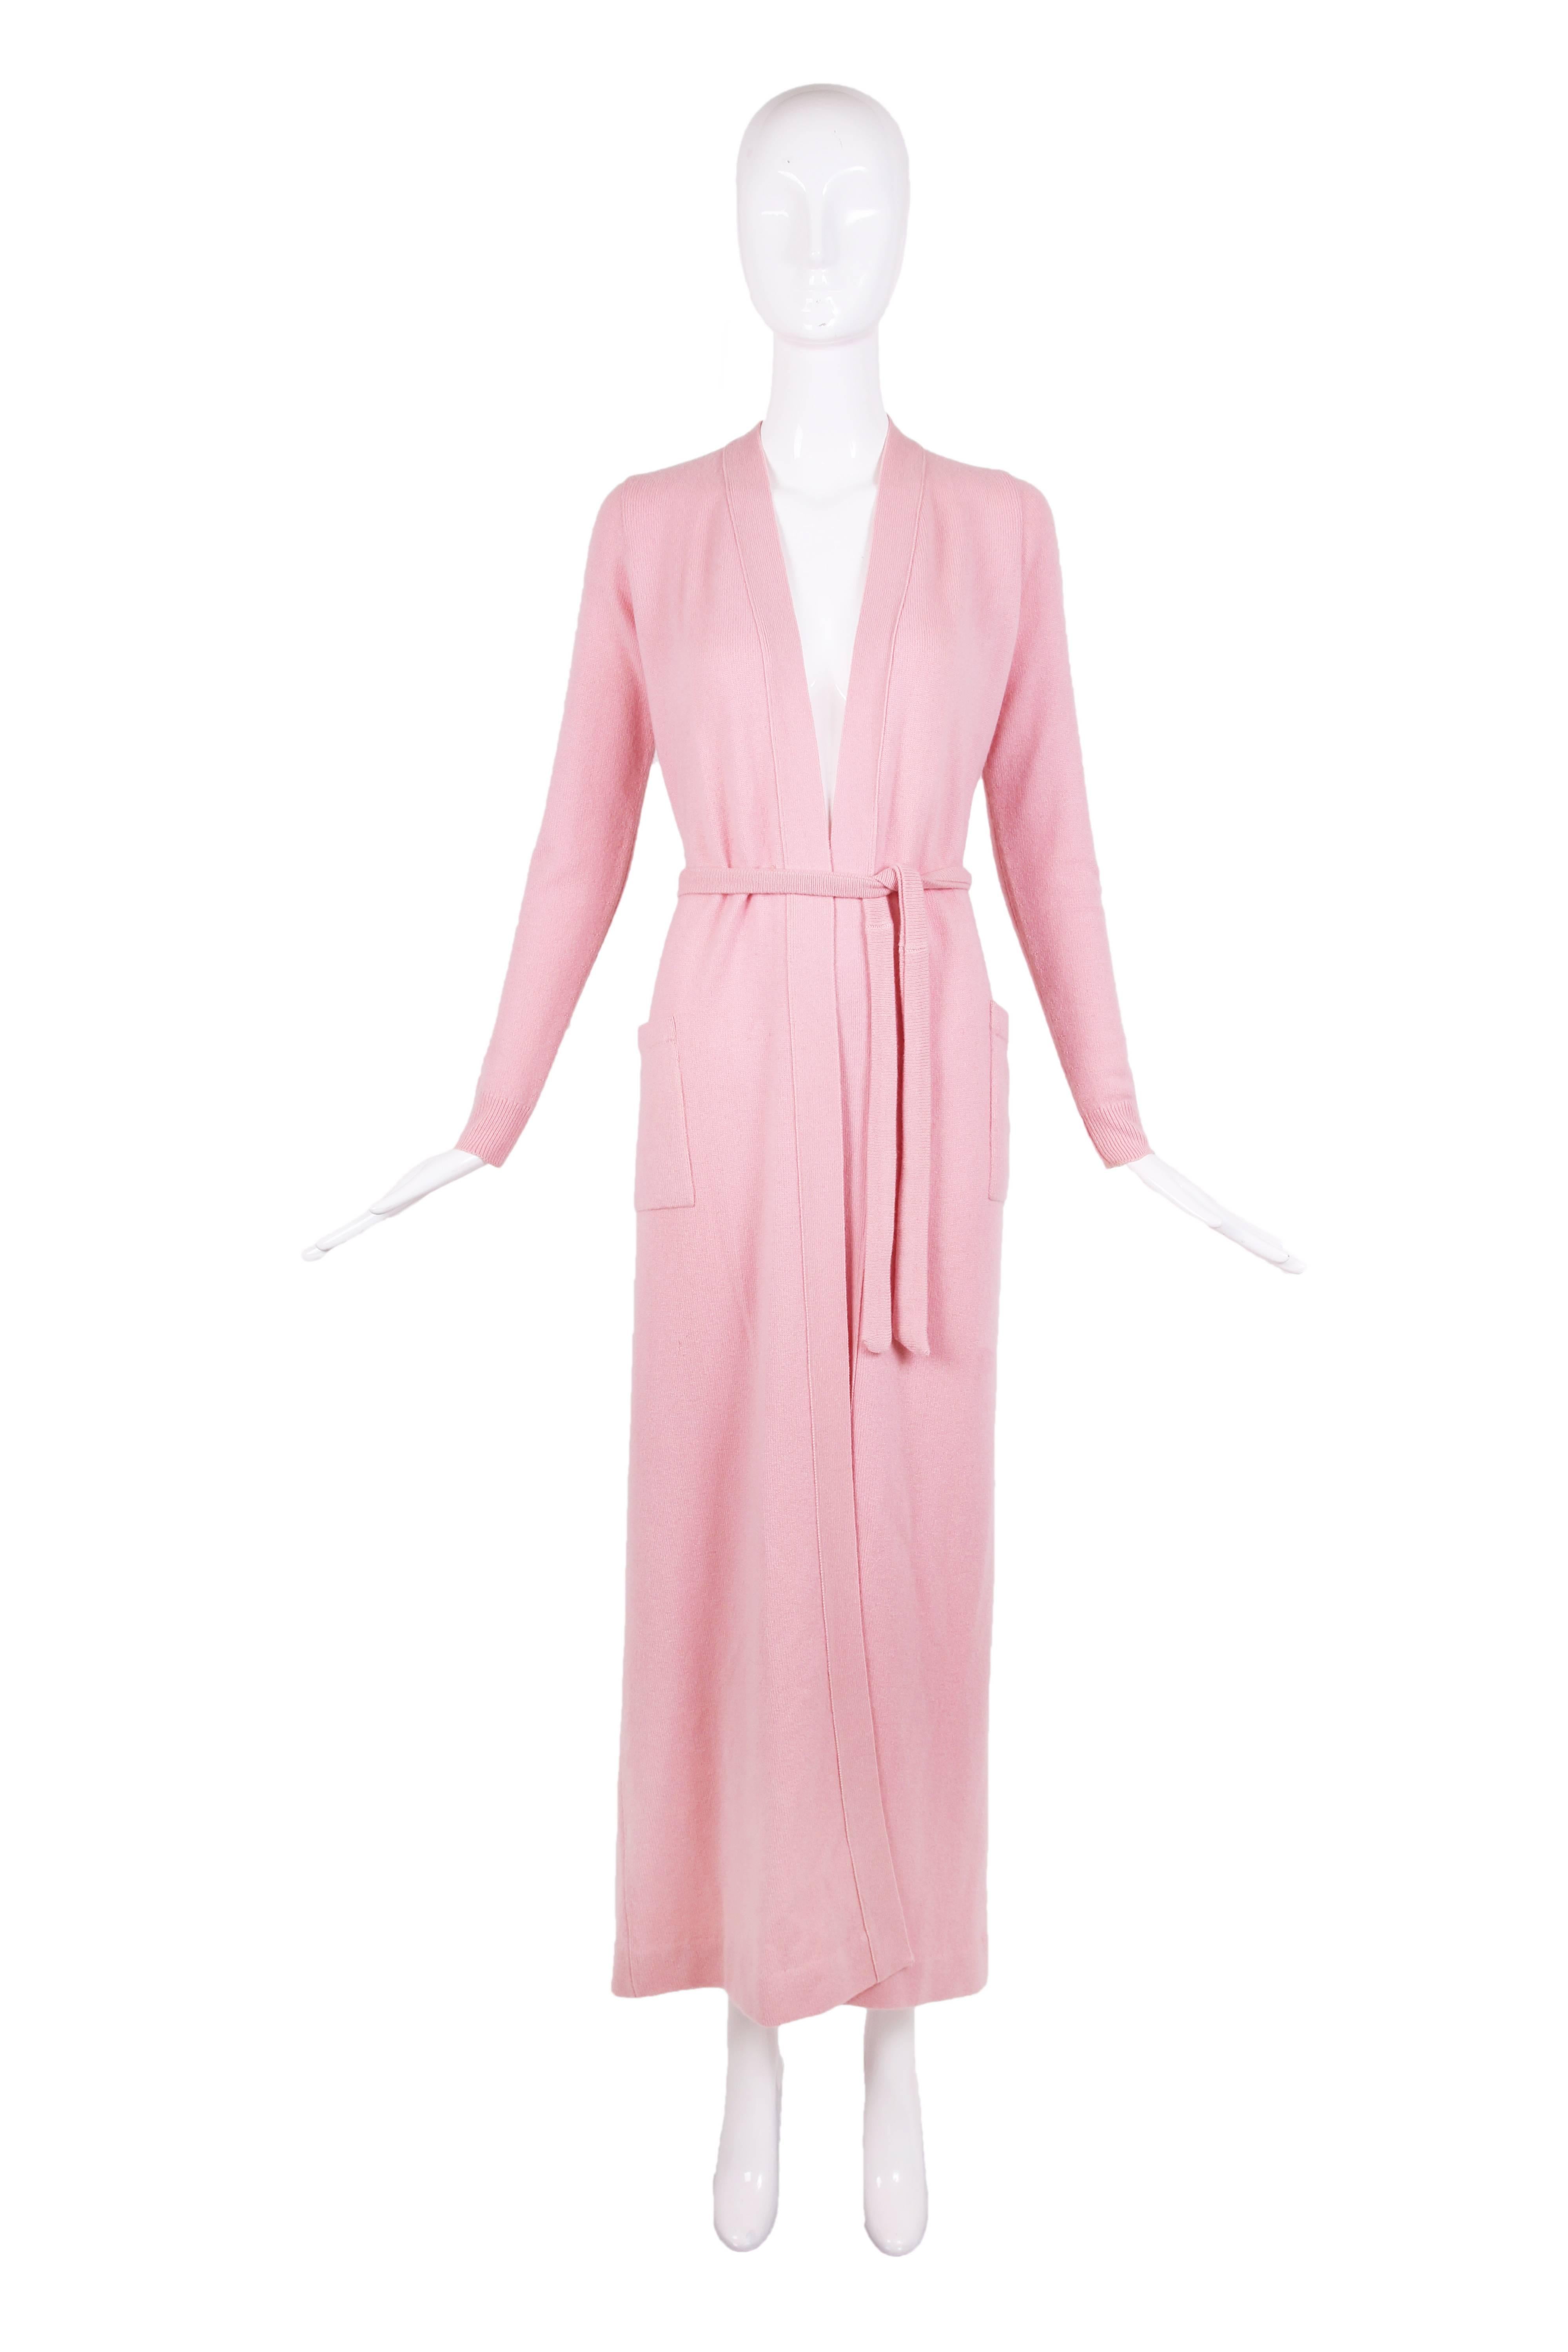 1970's Halston baby pink cashmere floor length cardigan with detachable self belt. In excellent condition with two nearly imperceptible repairs.
MEASUREMENTS:
Shoulders - 13